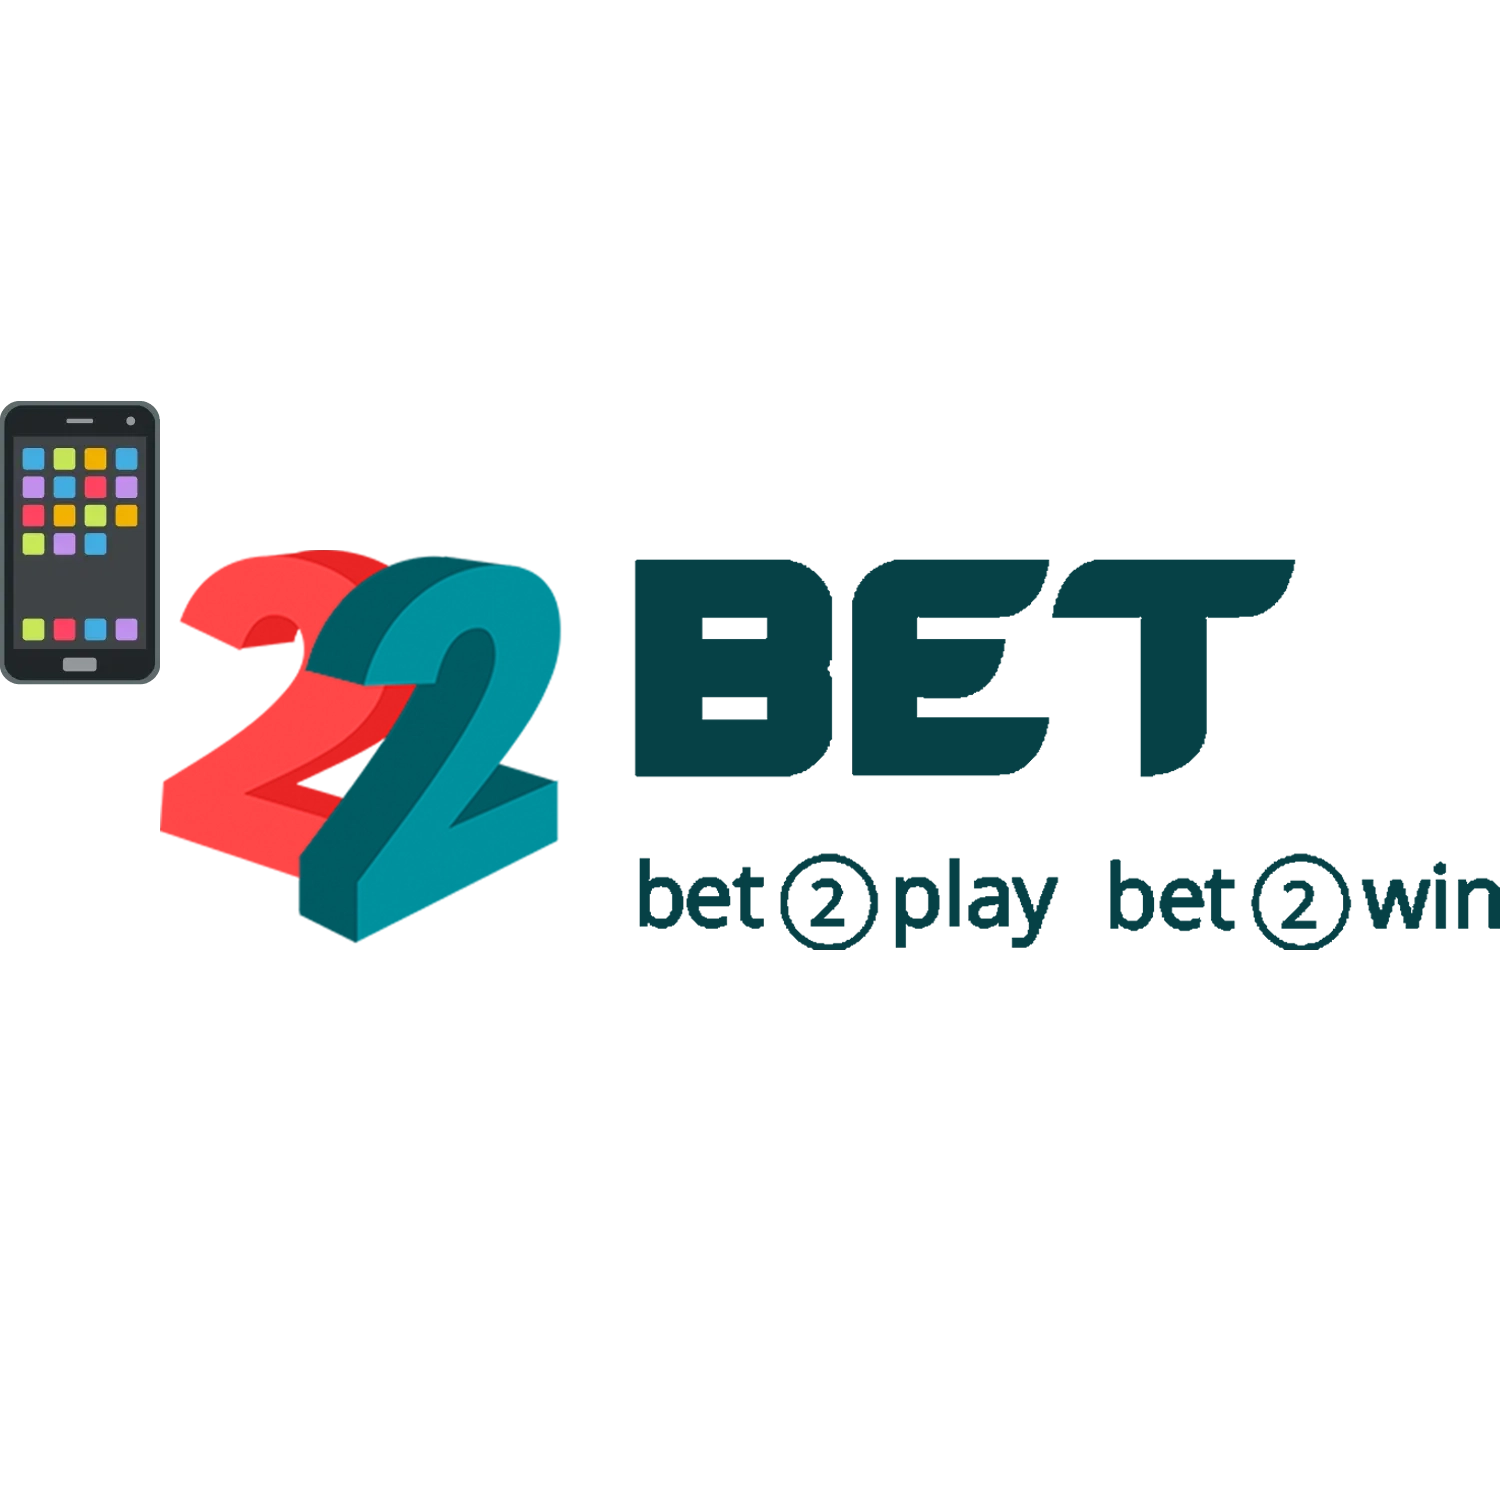 The 22bet app is renowned for its high quality performance.